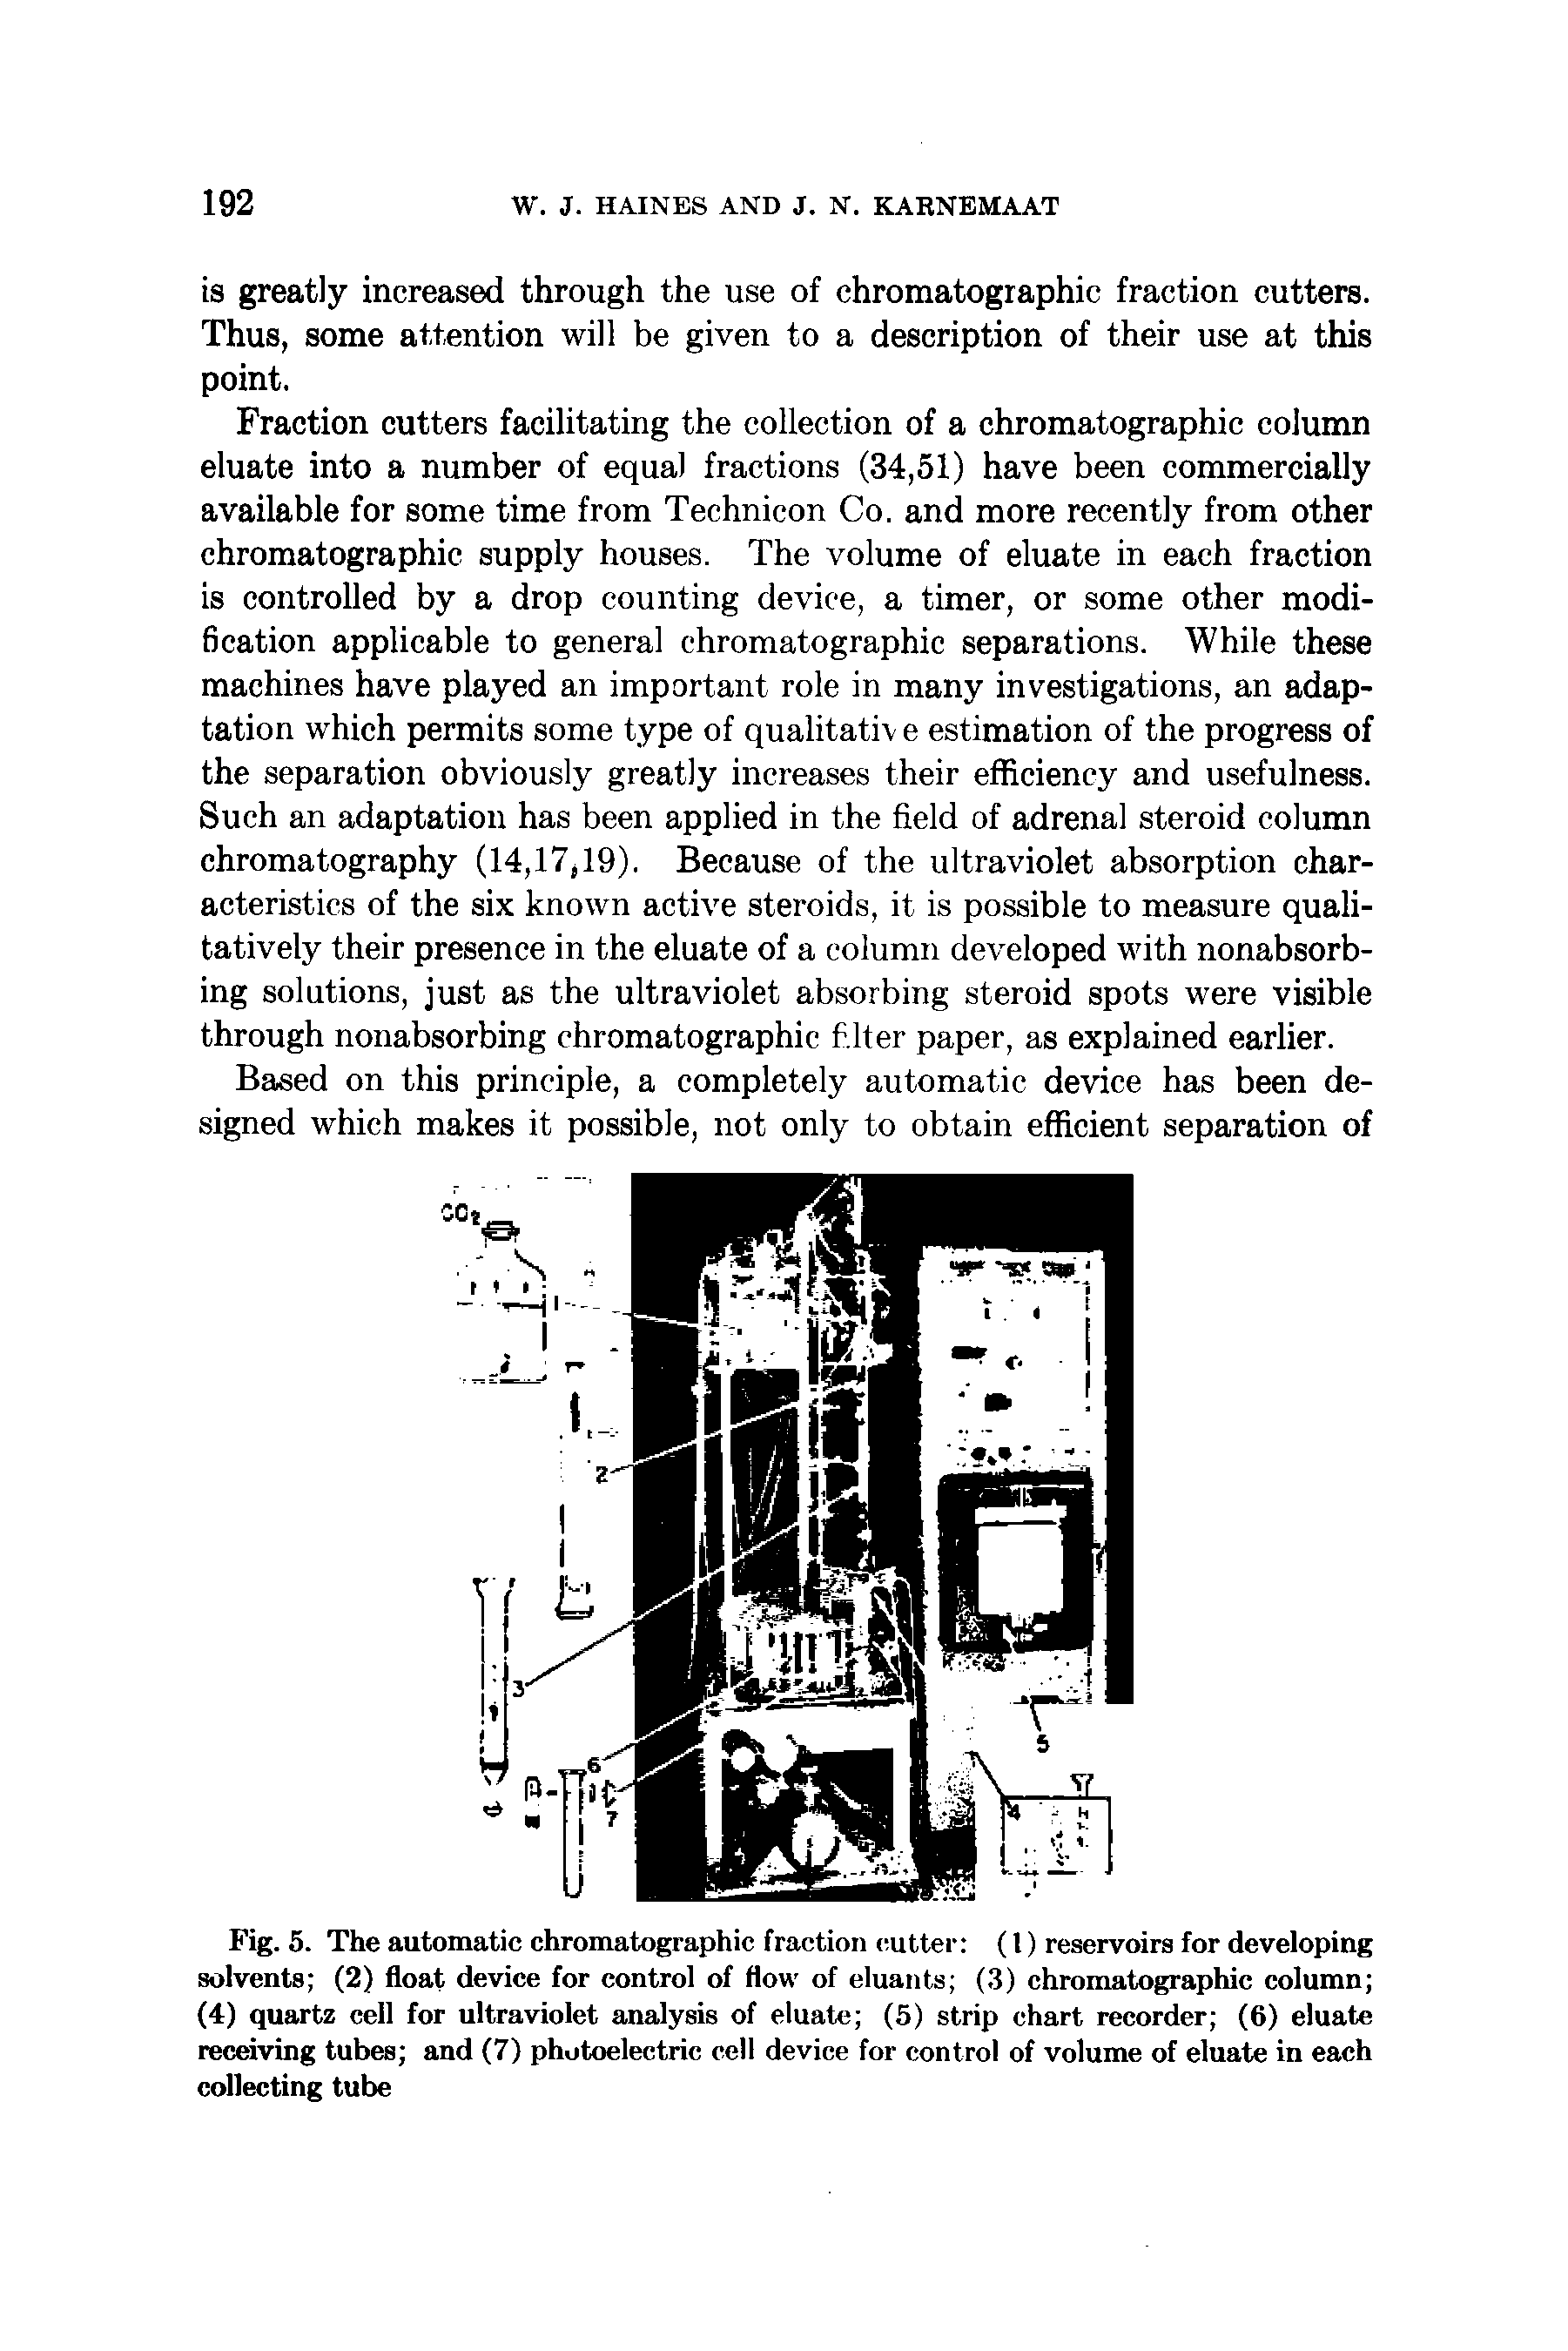 Fig. 5. The automatic chromatographic fraction <rutter (I) reservoirs for developing solvents (2) float device for control of flow of eluants (.3) chromatographic column (4) quartz cell for ultraviolet analysis of eluate (5) strip chart recorder (6) eluate receiving tubes and (7) photoelectric cell device for control of volume of eluate in each collecting tube...